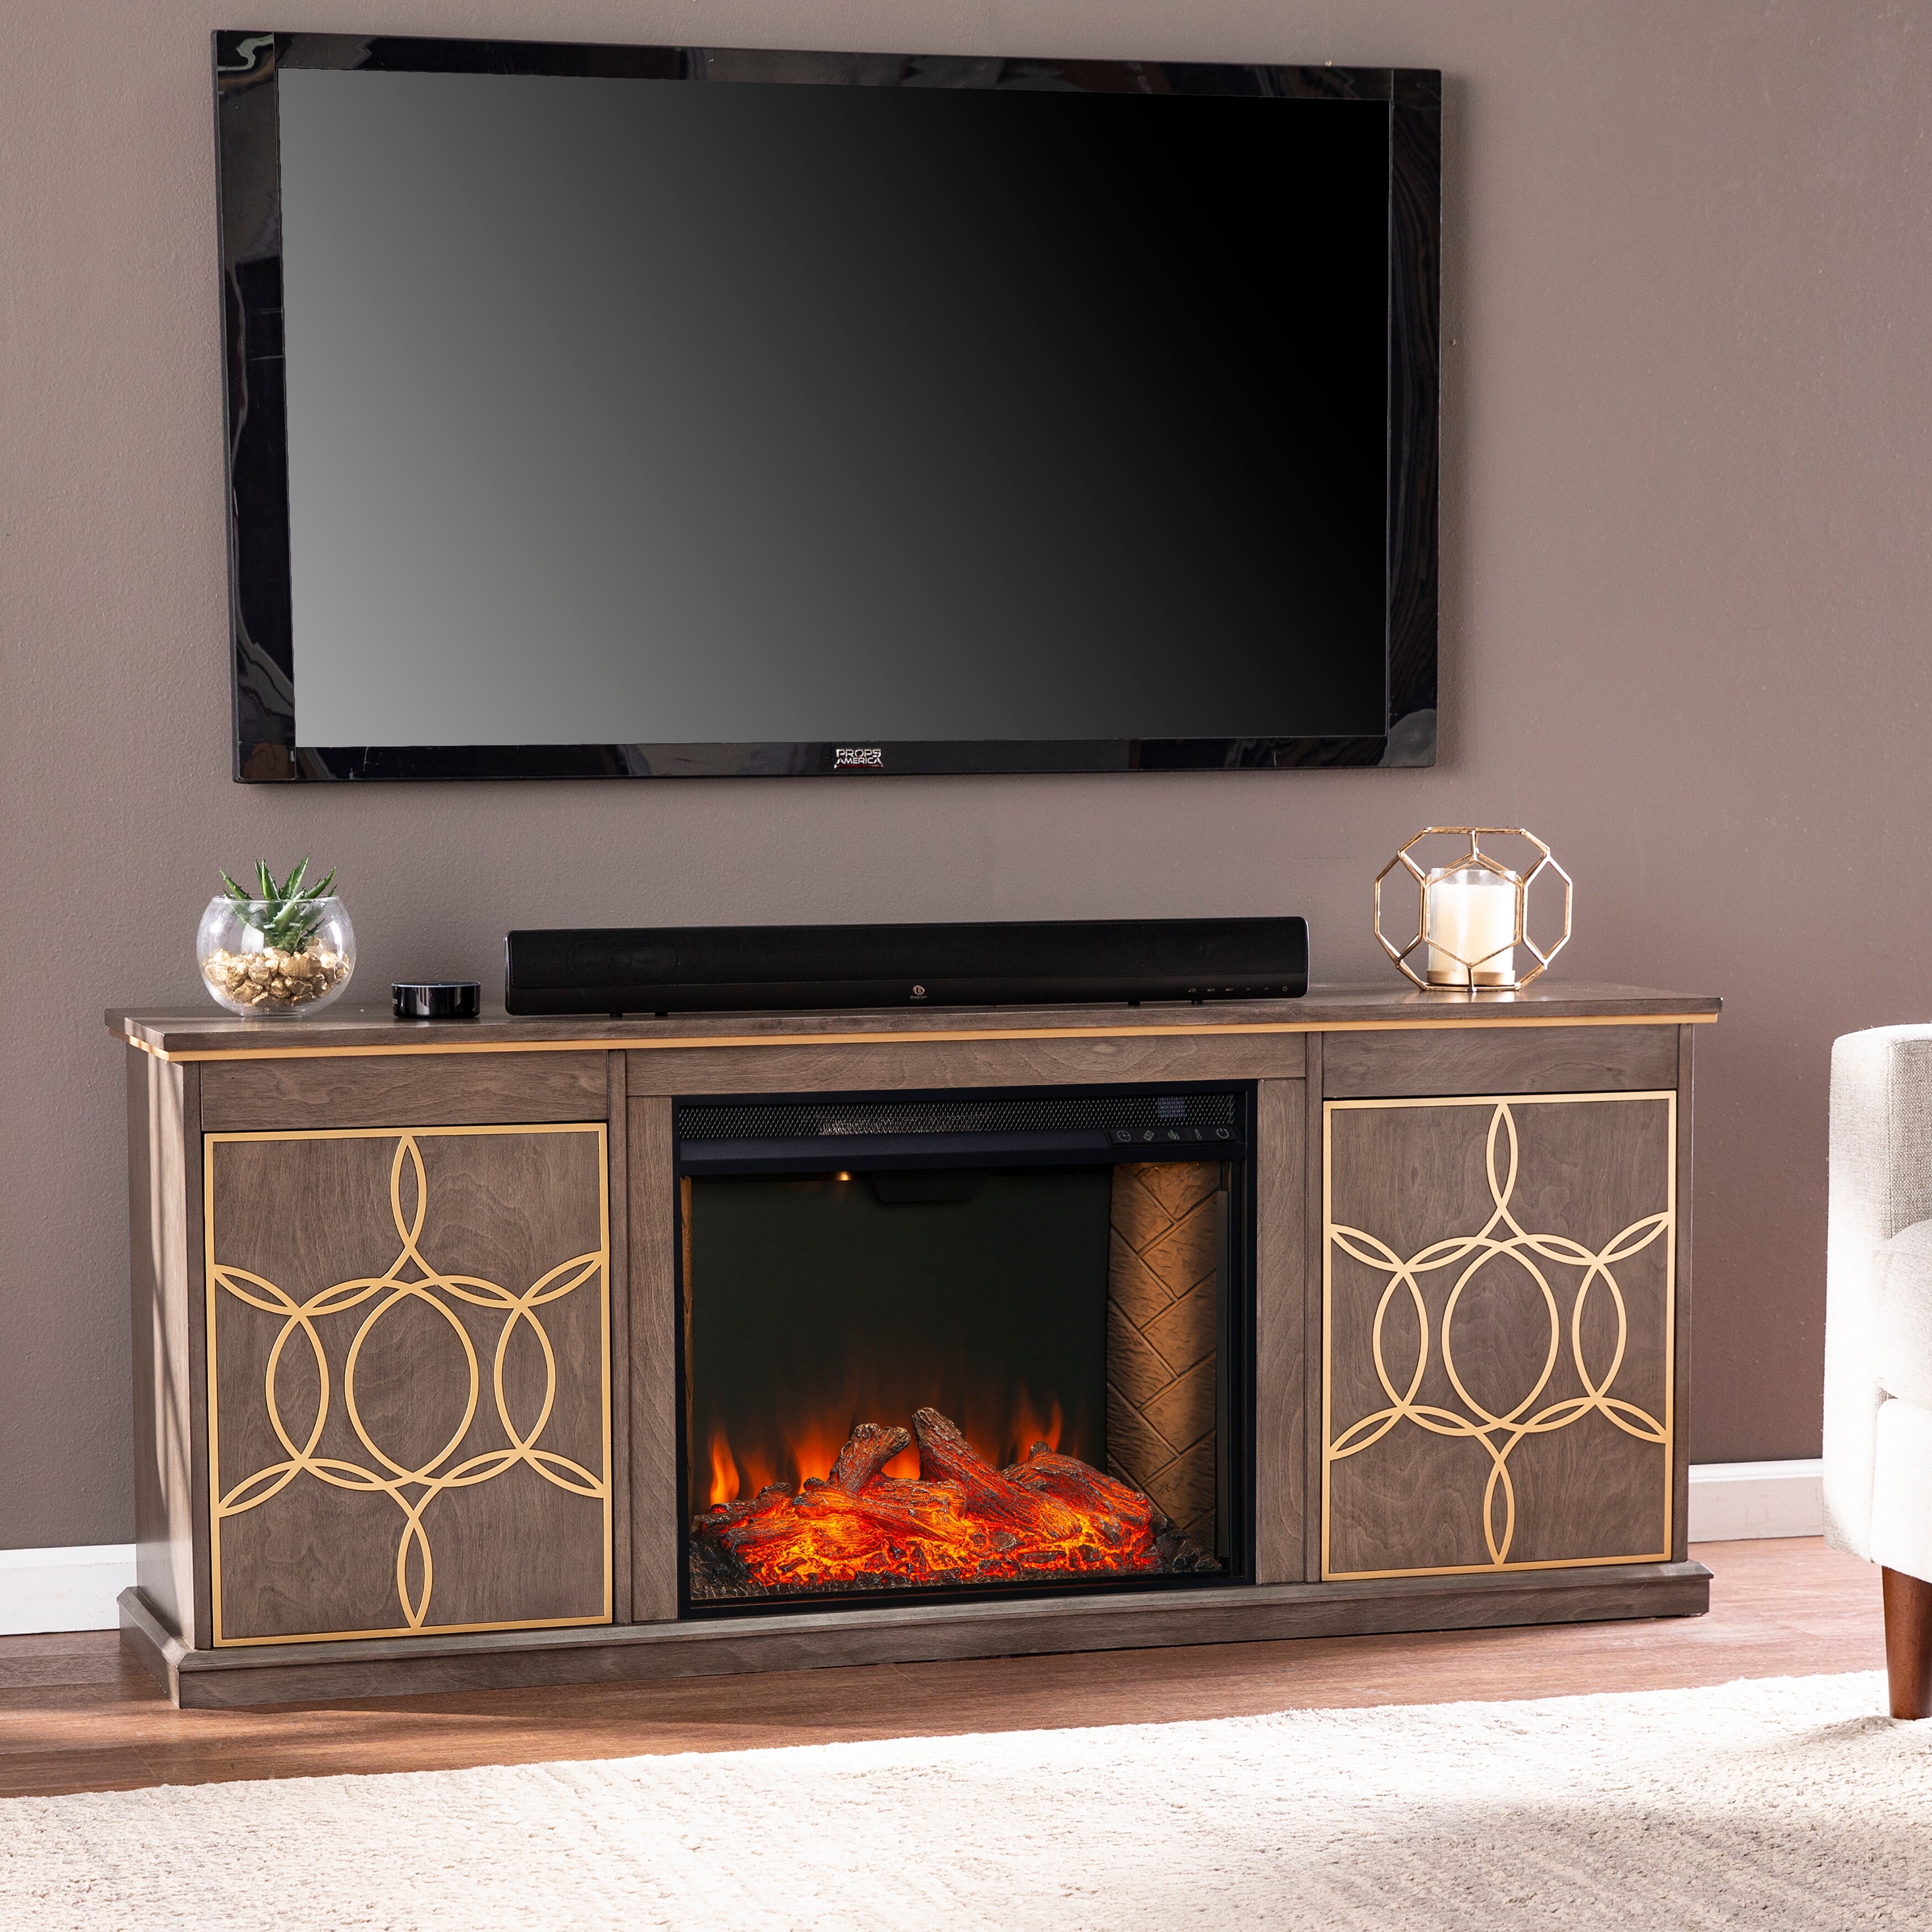 The Curated Nomad Ysidro Brown Alexa-Enabled Fireplace Console